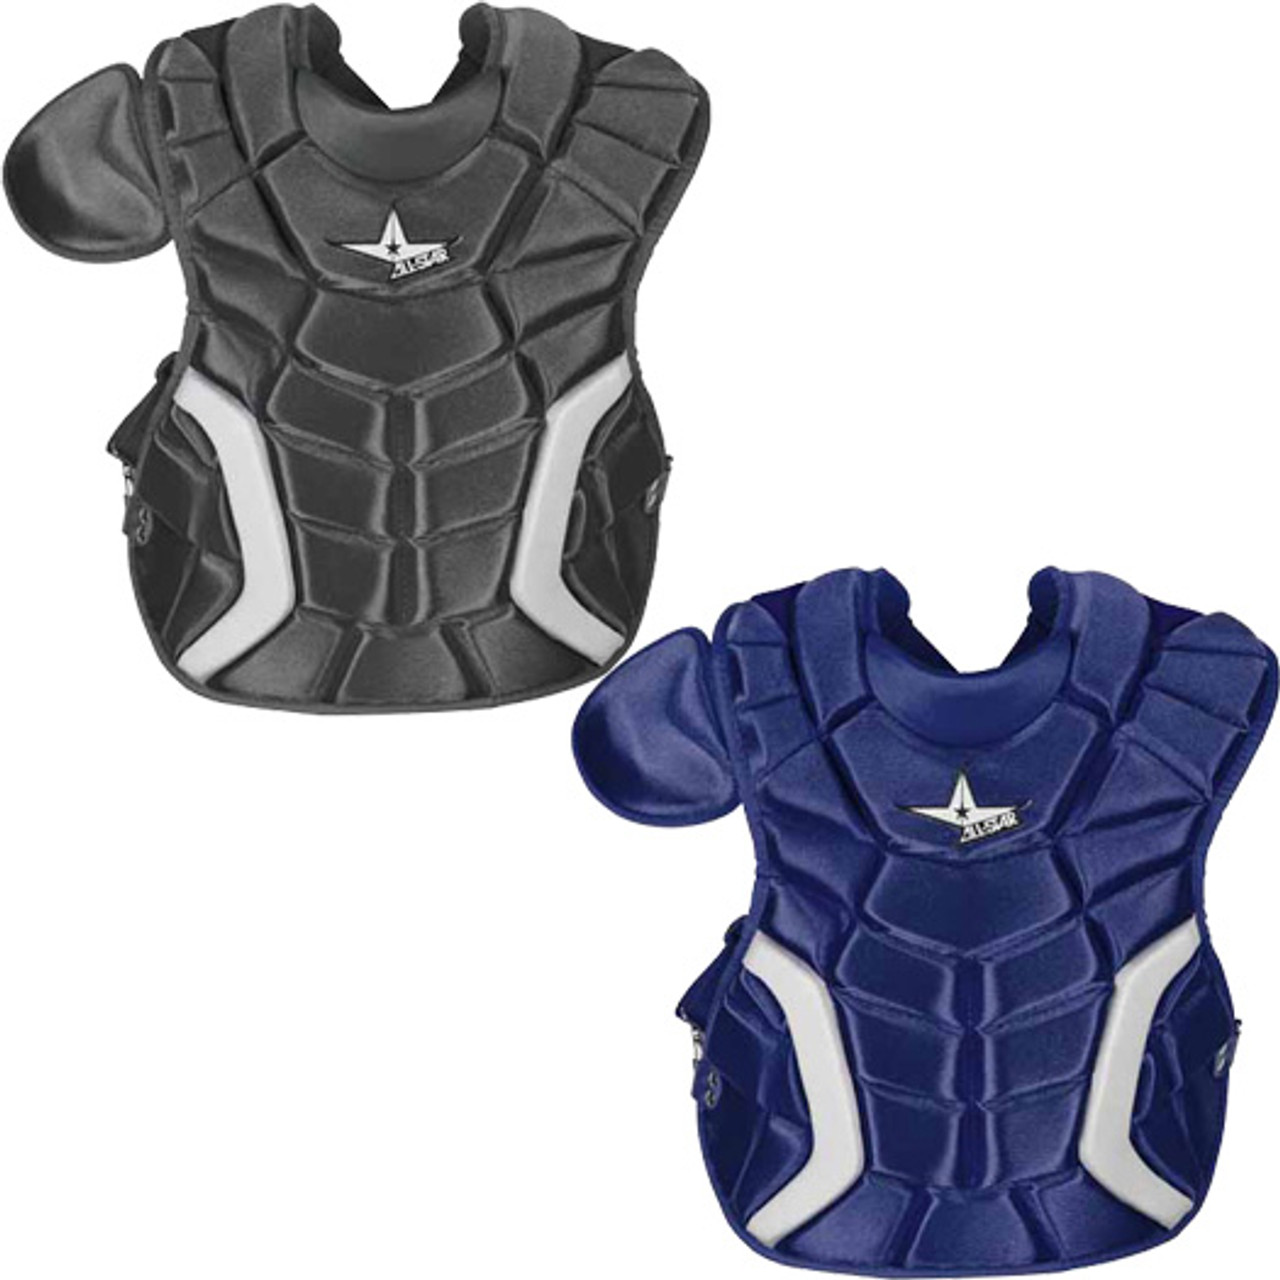 All-Star Player's Series - CP1216PS - Intermediate Catcher's Chest Protector